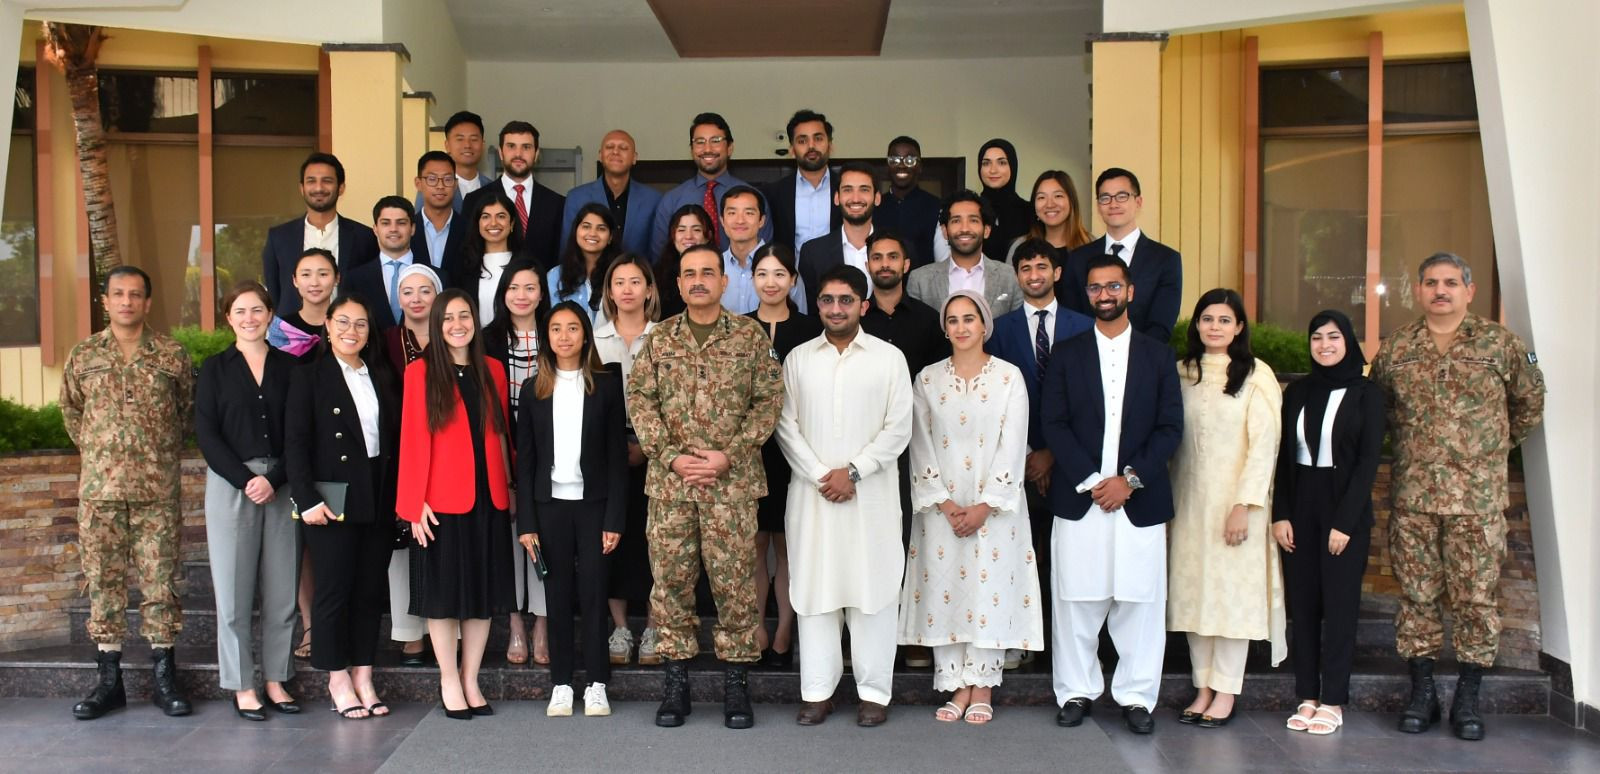 the students from harvard university met with the coas general asim munir at ghq in rawalpindi as part of their visit to pakistan photo ispr